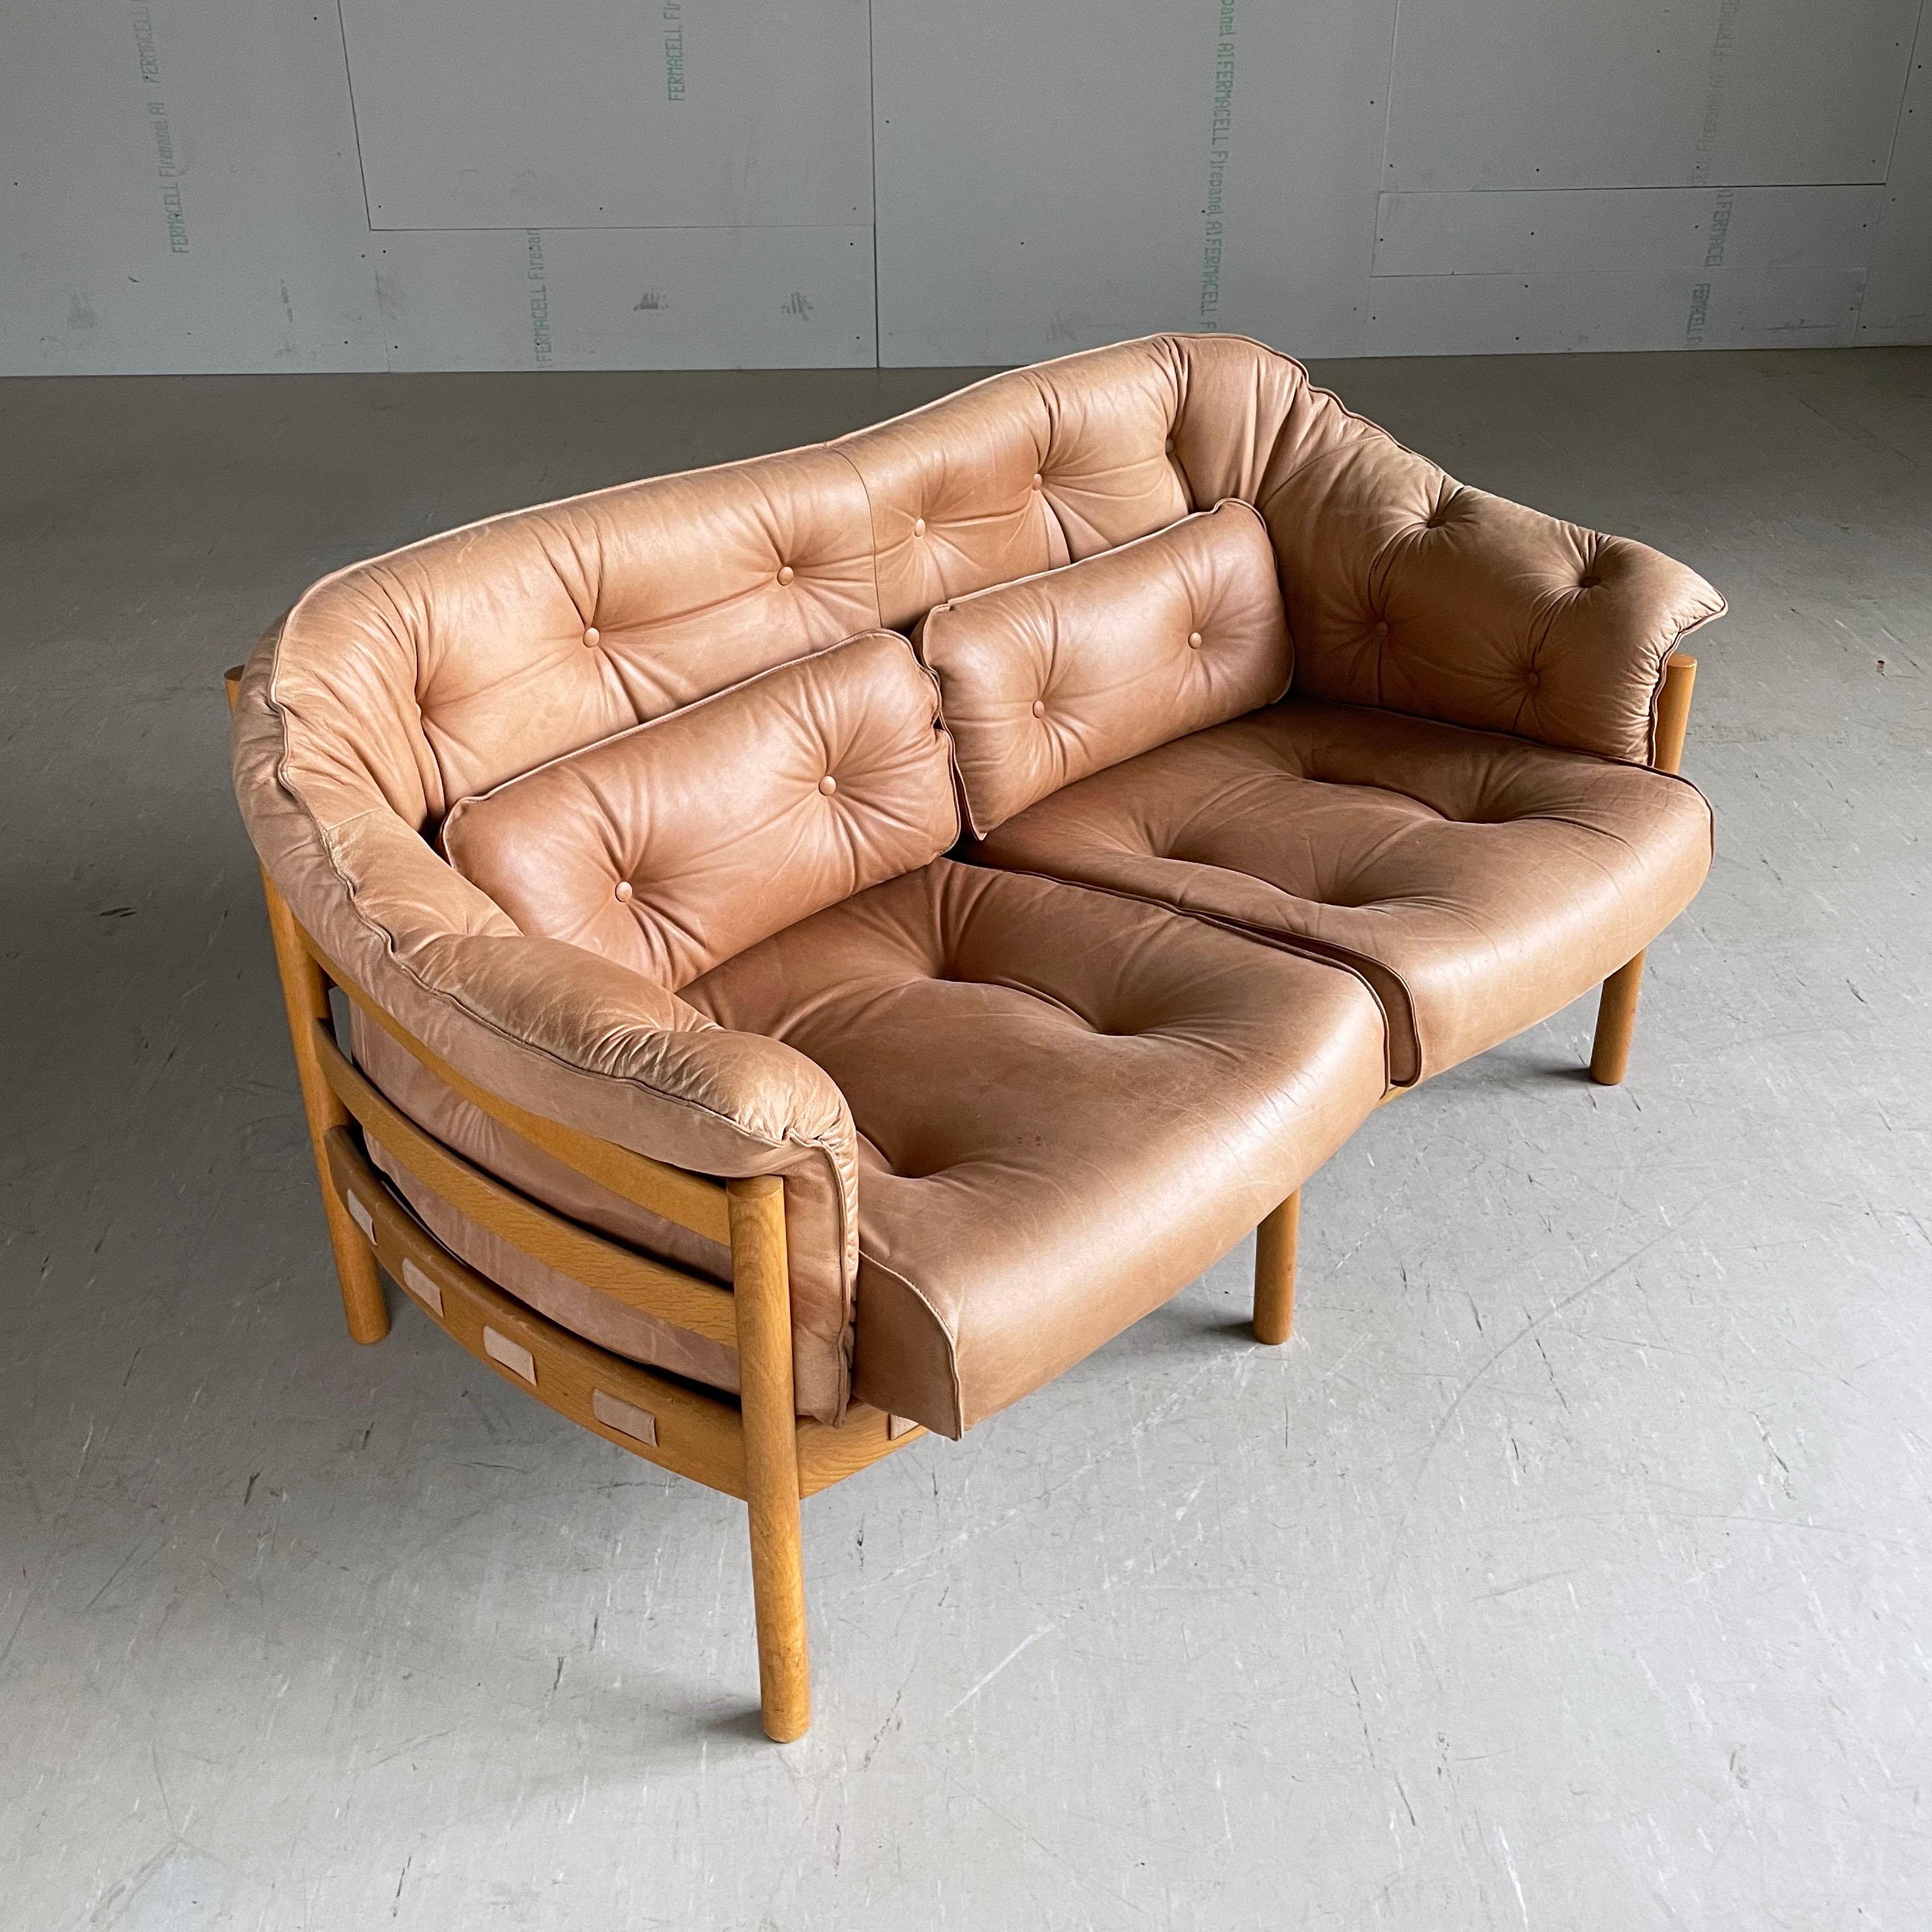 Leather Sven Ellekaer leather sofa produced by Coja For Sale